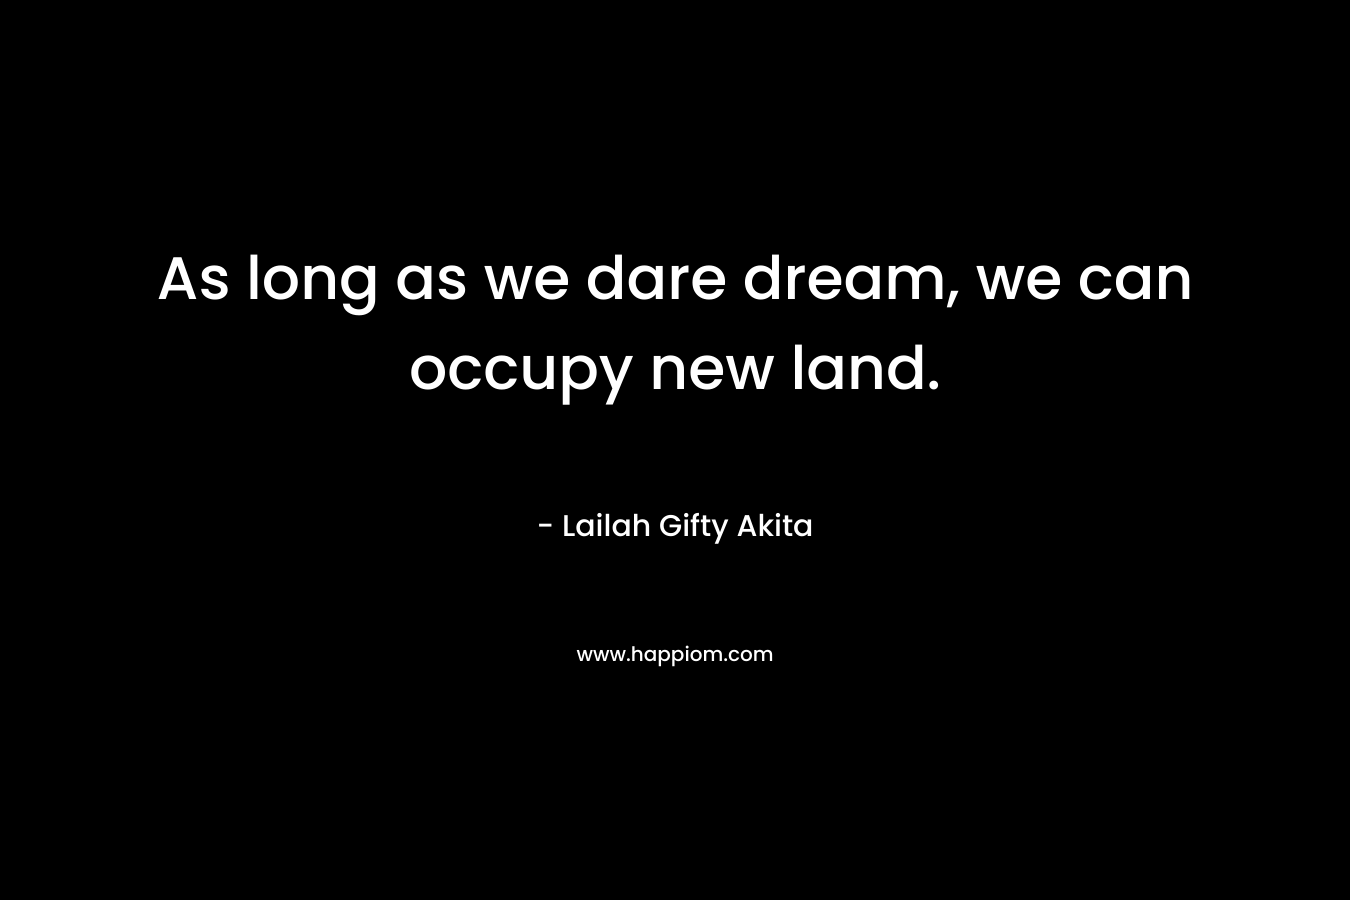 As long as we dare dream, we can occupy new land.